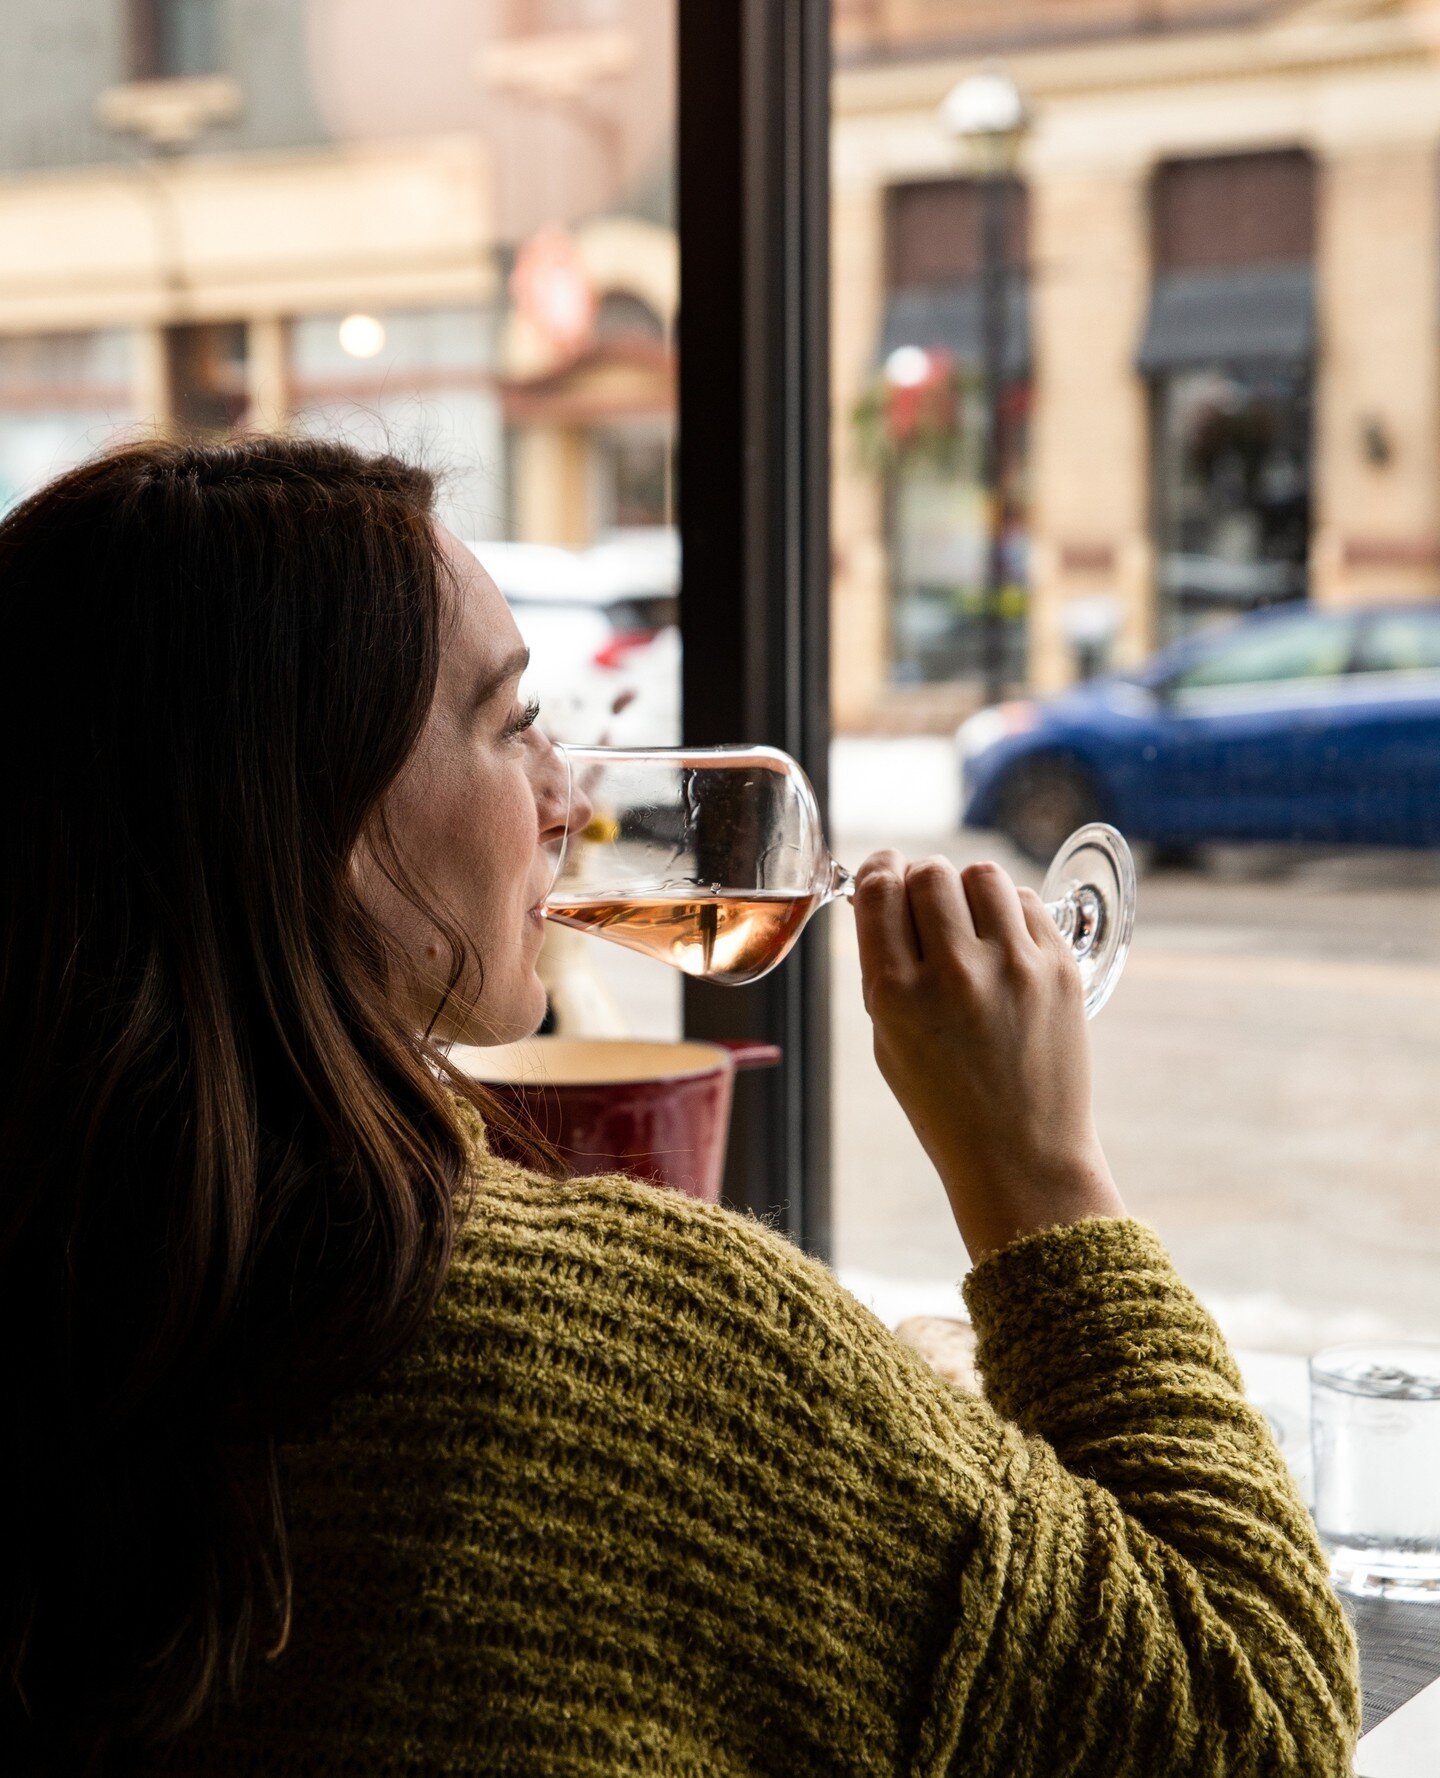 Looking for a cozy spot for a mid-week pick-me-up? 🍷 Provenance Wine Bar's got you covered! Join us Wednesday through Saturday from 4pm to 10pm for a glass (or bottle) of some of the best local and international wines around. Whether you're meeting 